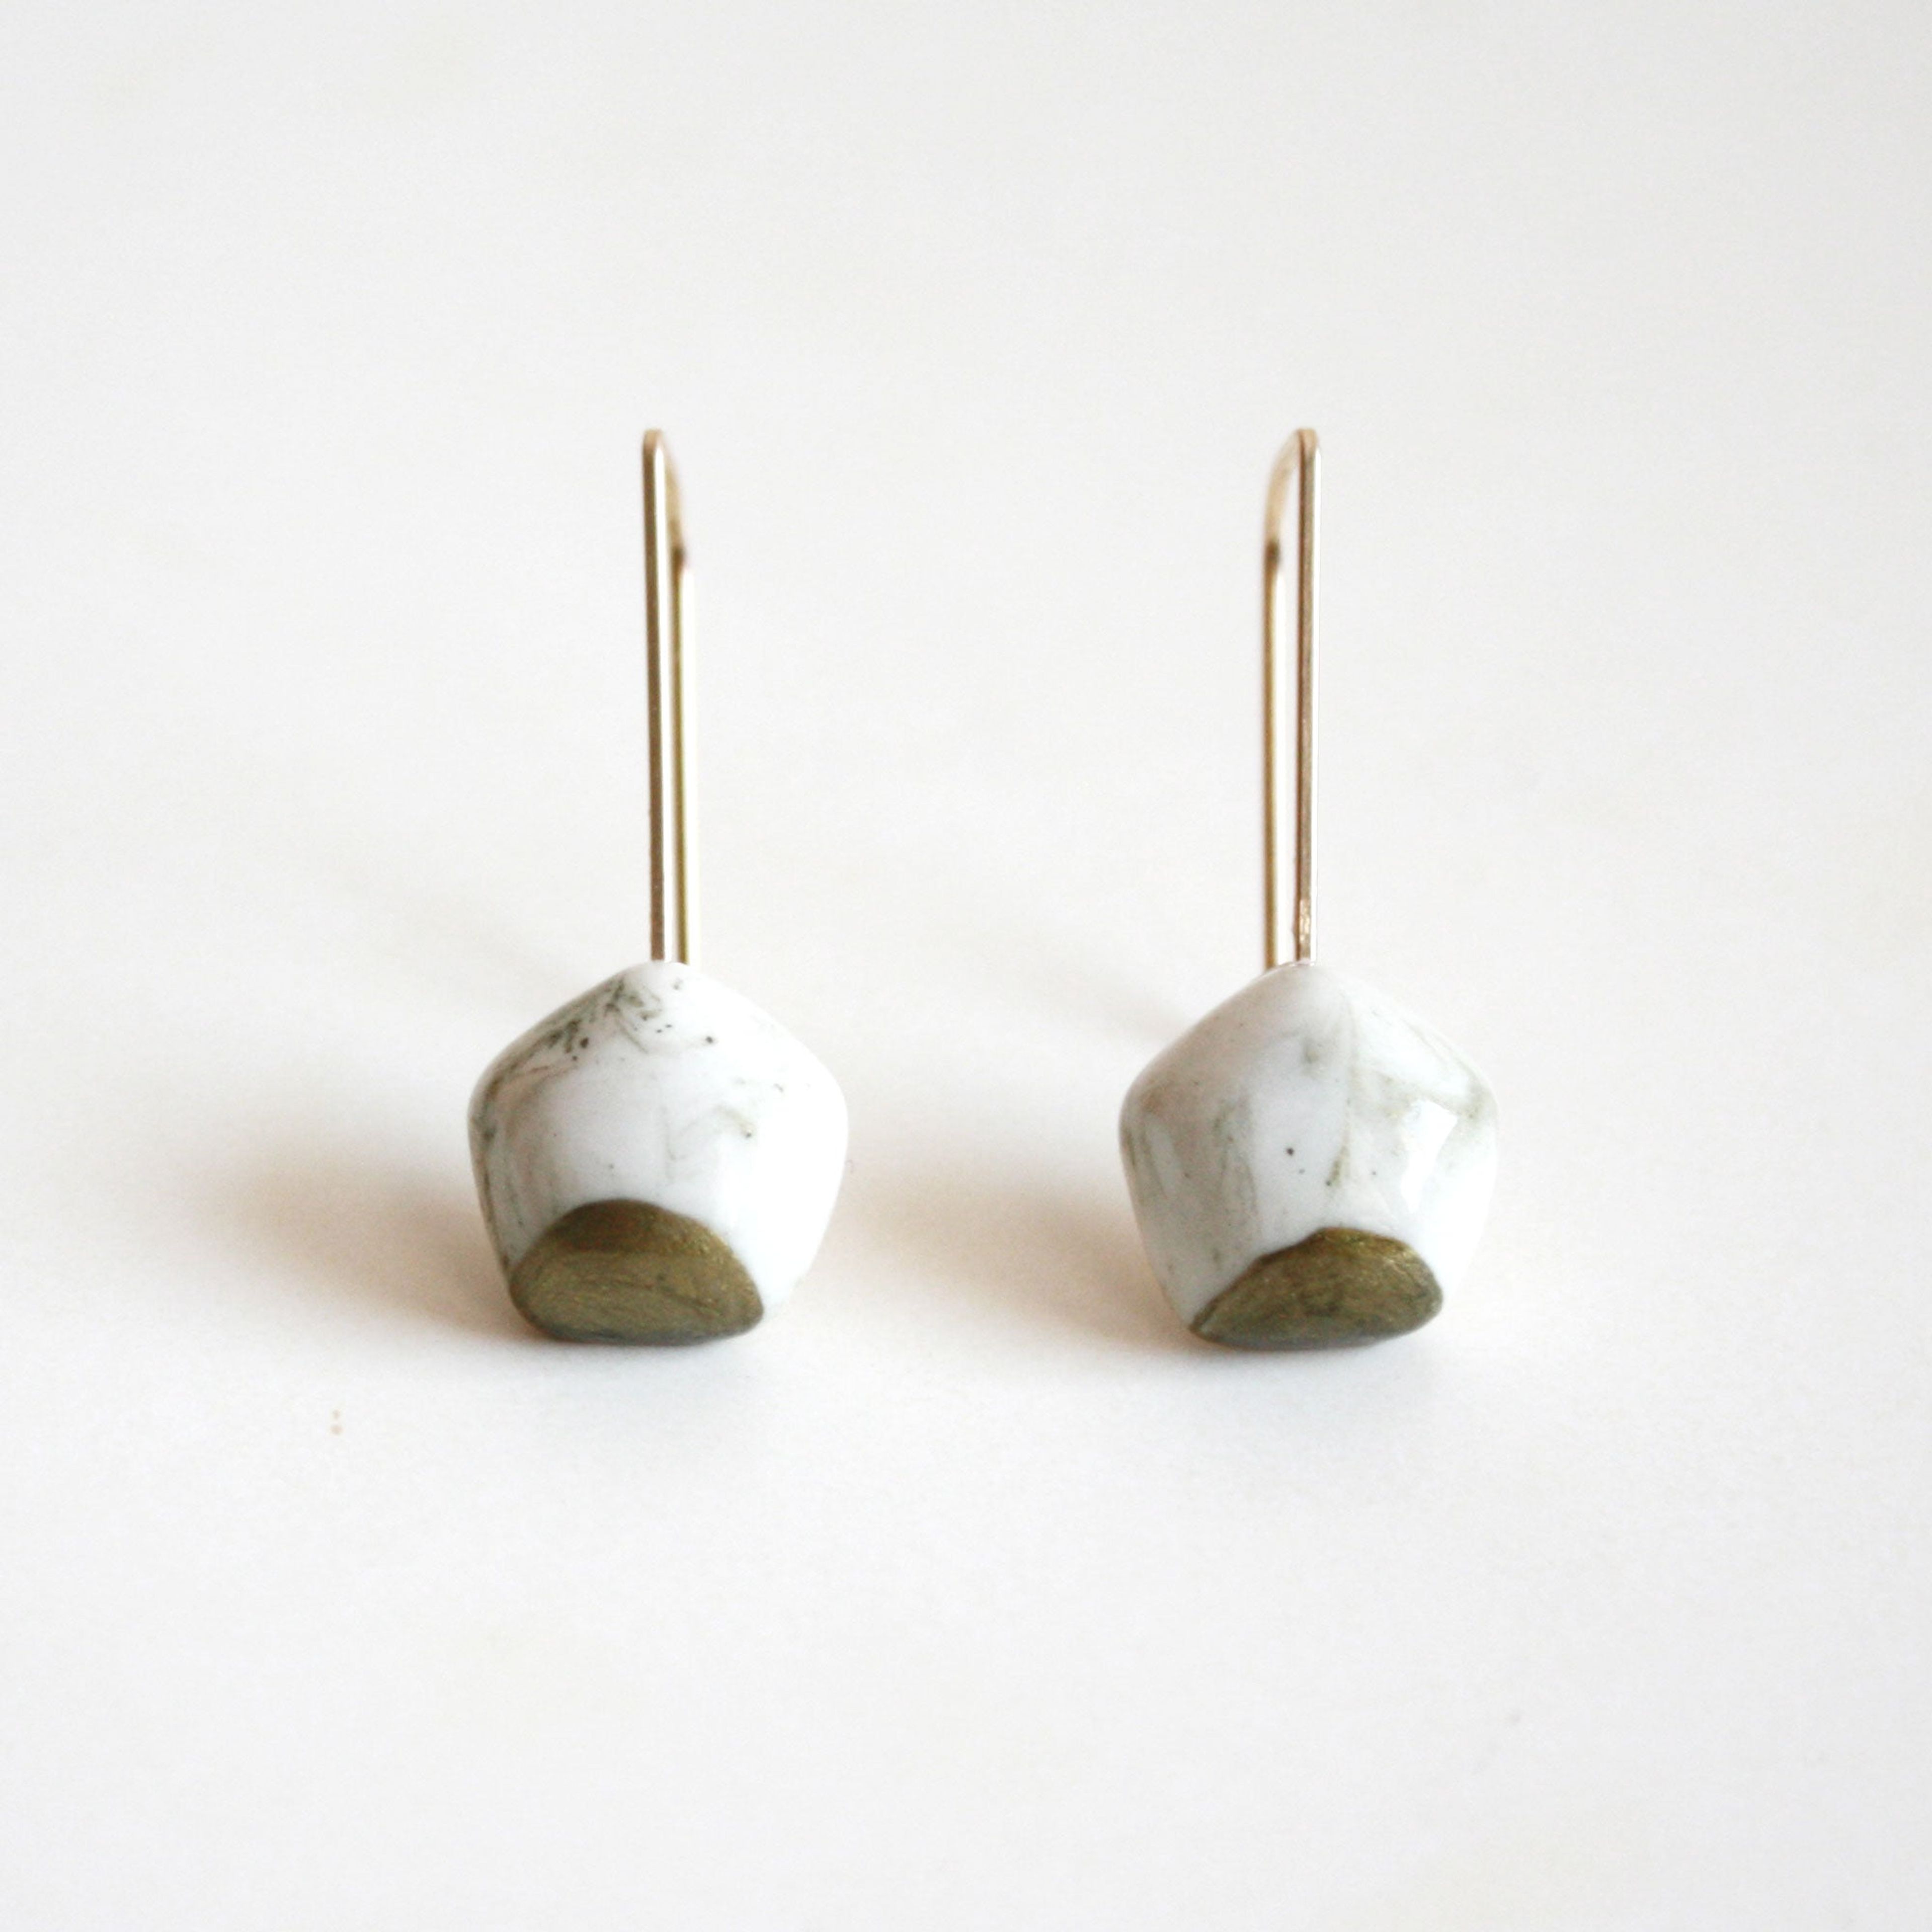 Organic Pentagon Earrings accented with Gold Color